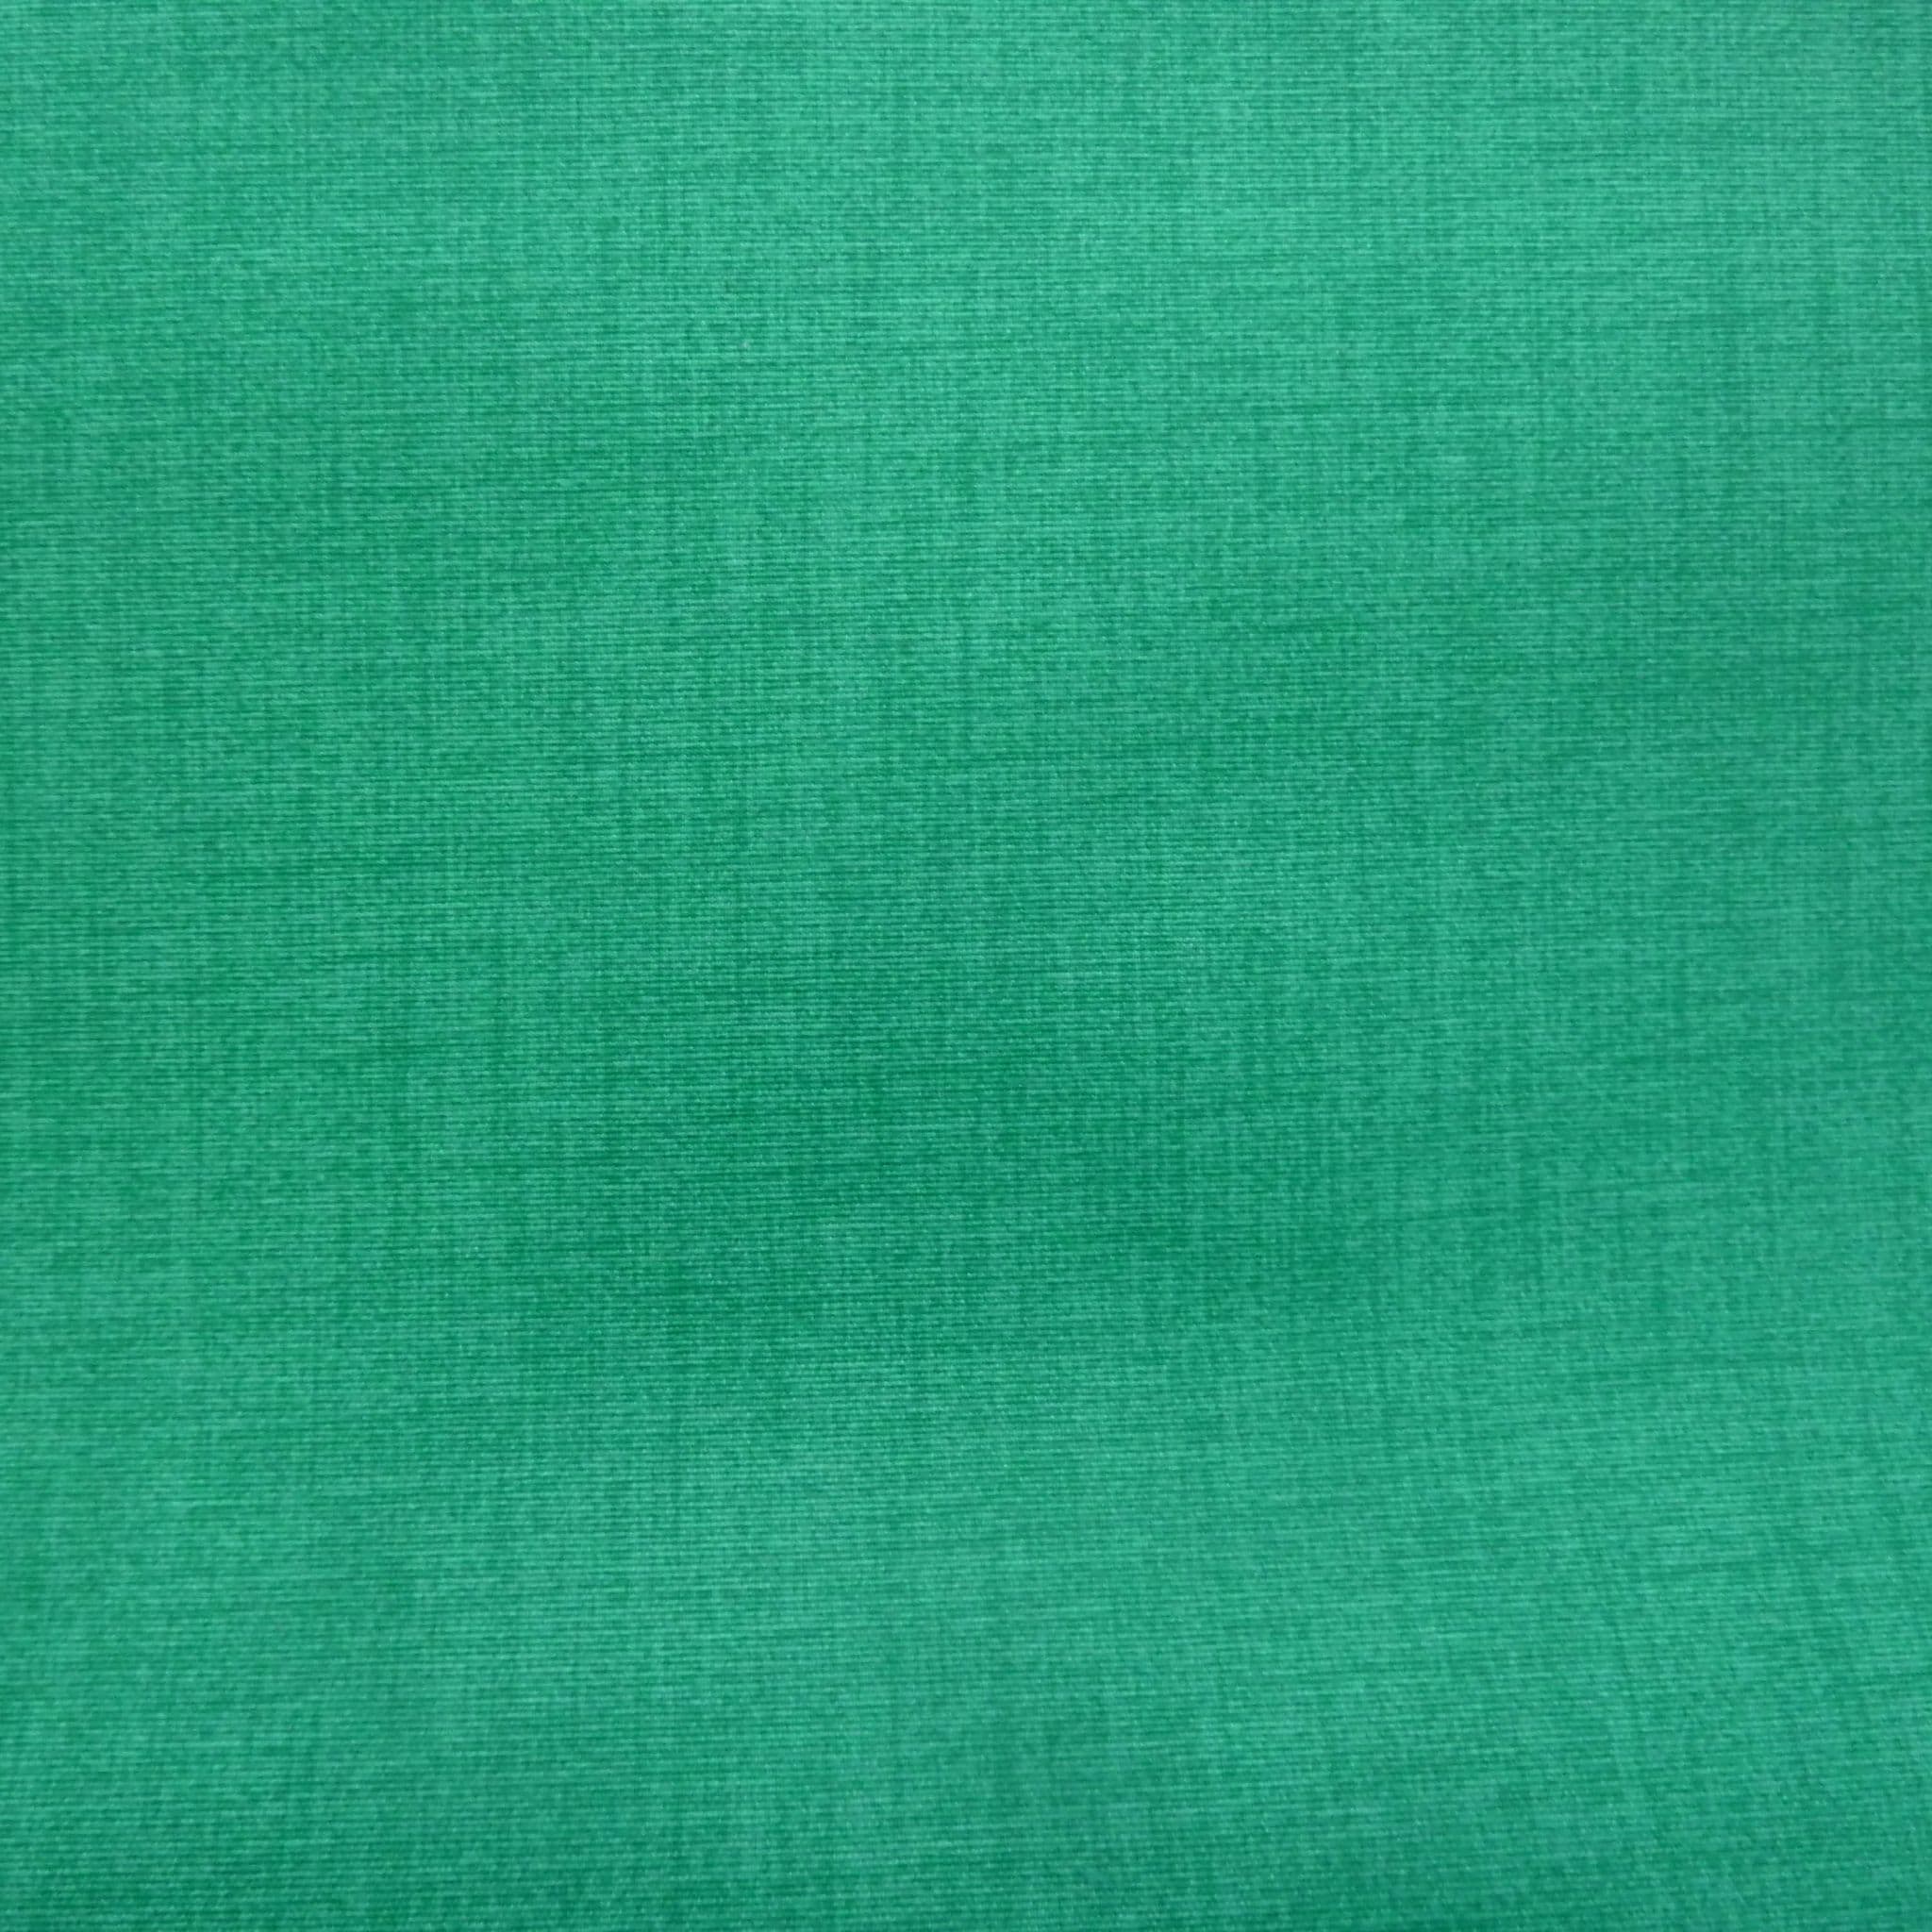 Spanish Plain Extra Wide Oilcloth in Jade